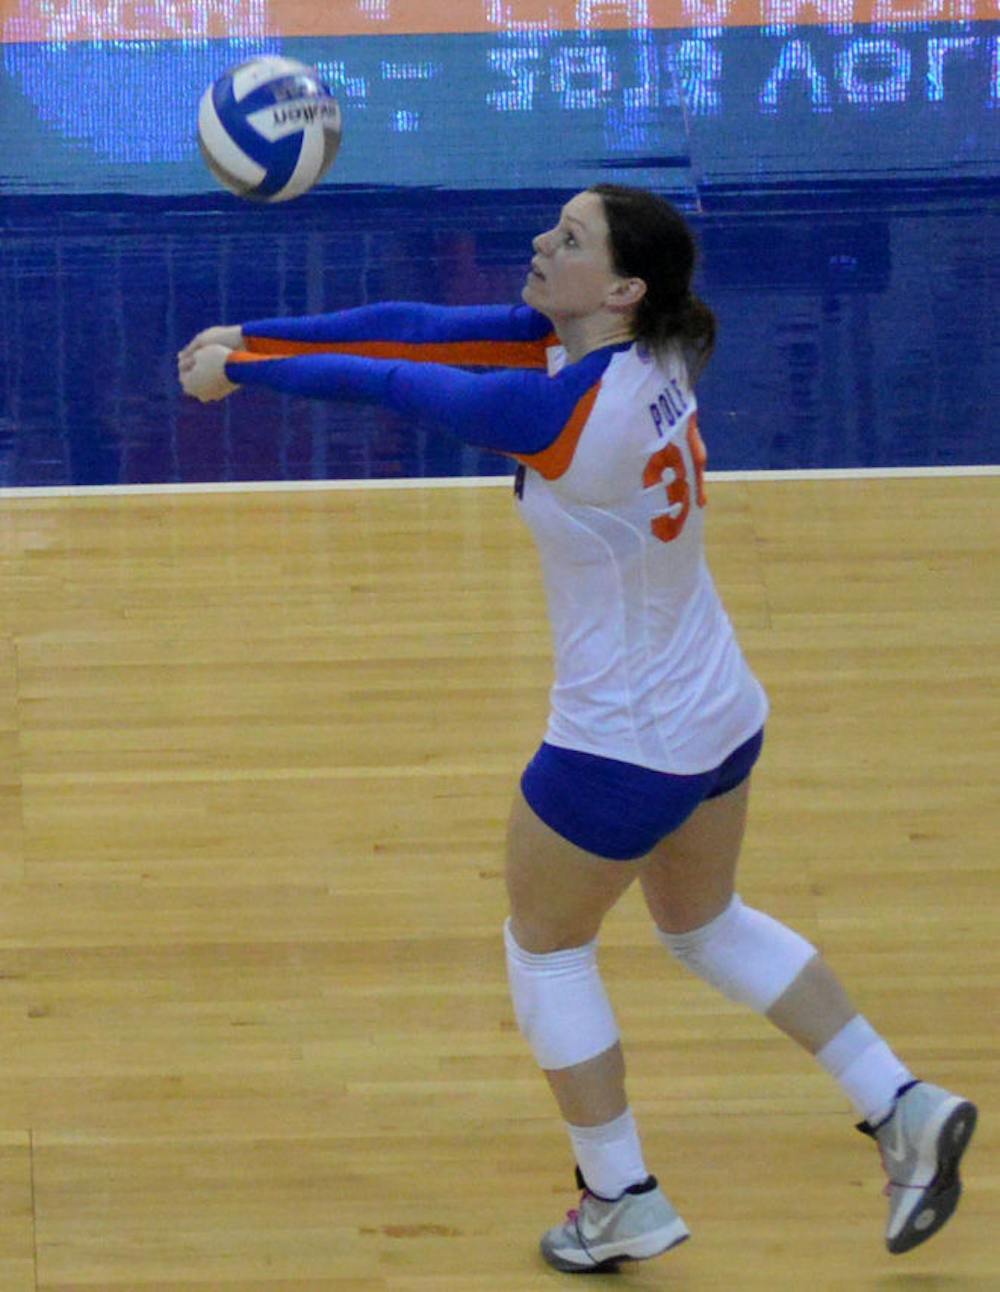 <p>Holly Pole records a dig during Florida's 3-2 loss to Florida State on Dec. 6 in the second round of the NCAA Tournament in the O'Connell Center. Pole has 527 career digs and 52 career service aces heading into the 2014 season — her senior year.</p>